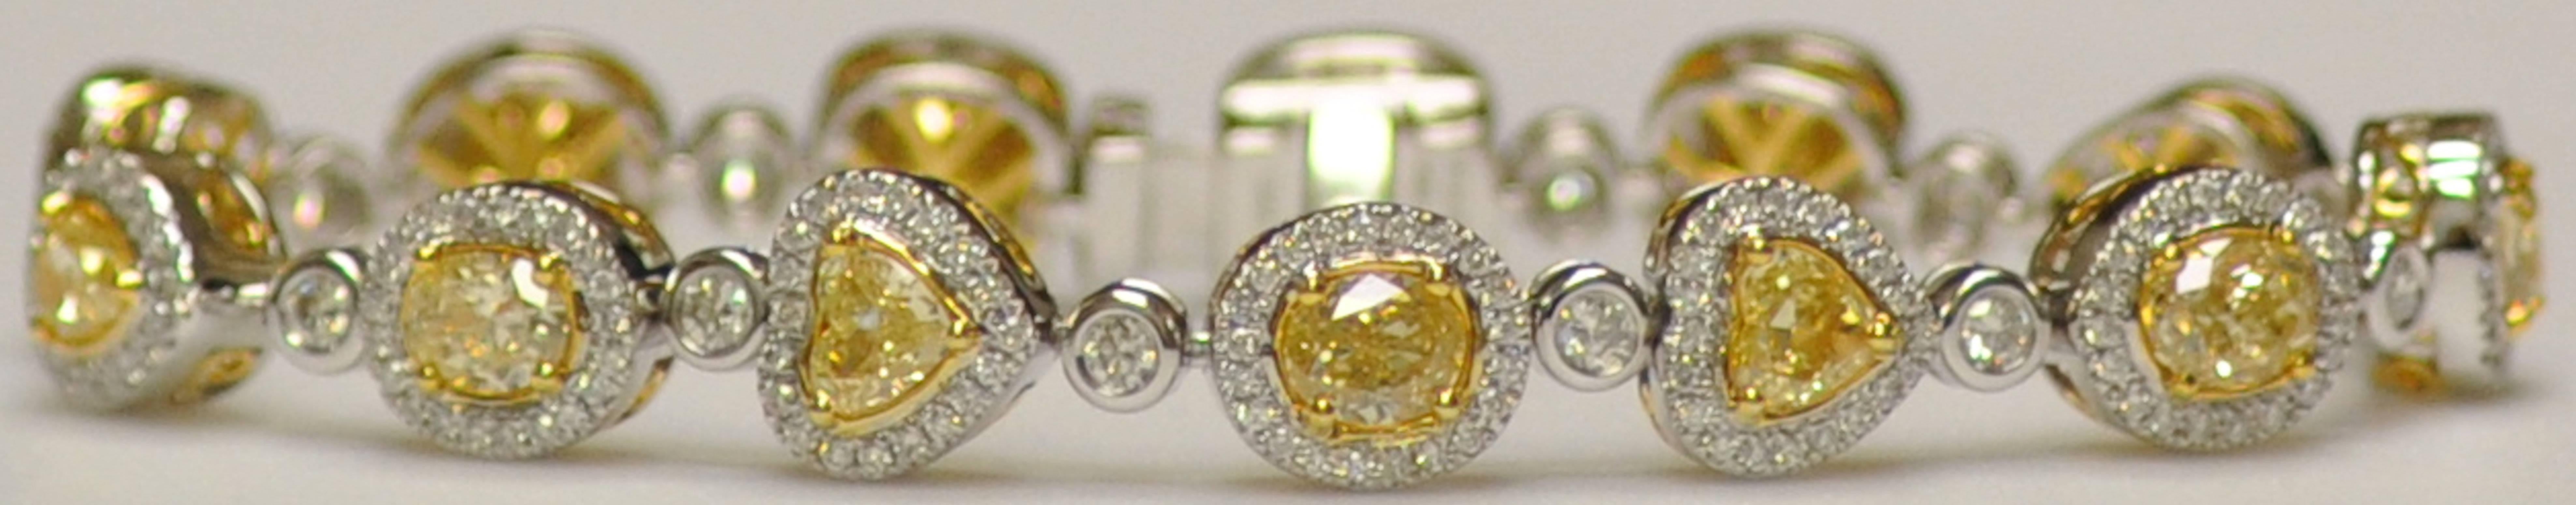 A lovely bracelet by Yael Jewelry based in California.  It has 13 yellow diamonds: radiant, oval, pear shape and heart shape weighing 7.59 carats total.  Surrounding each yellow diamonds are small white round diamonds totaling 2.72 carats.  Diamond